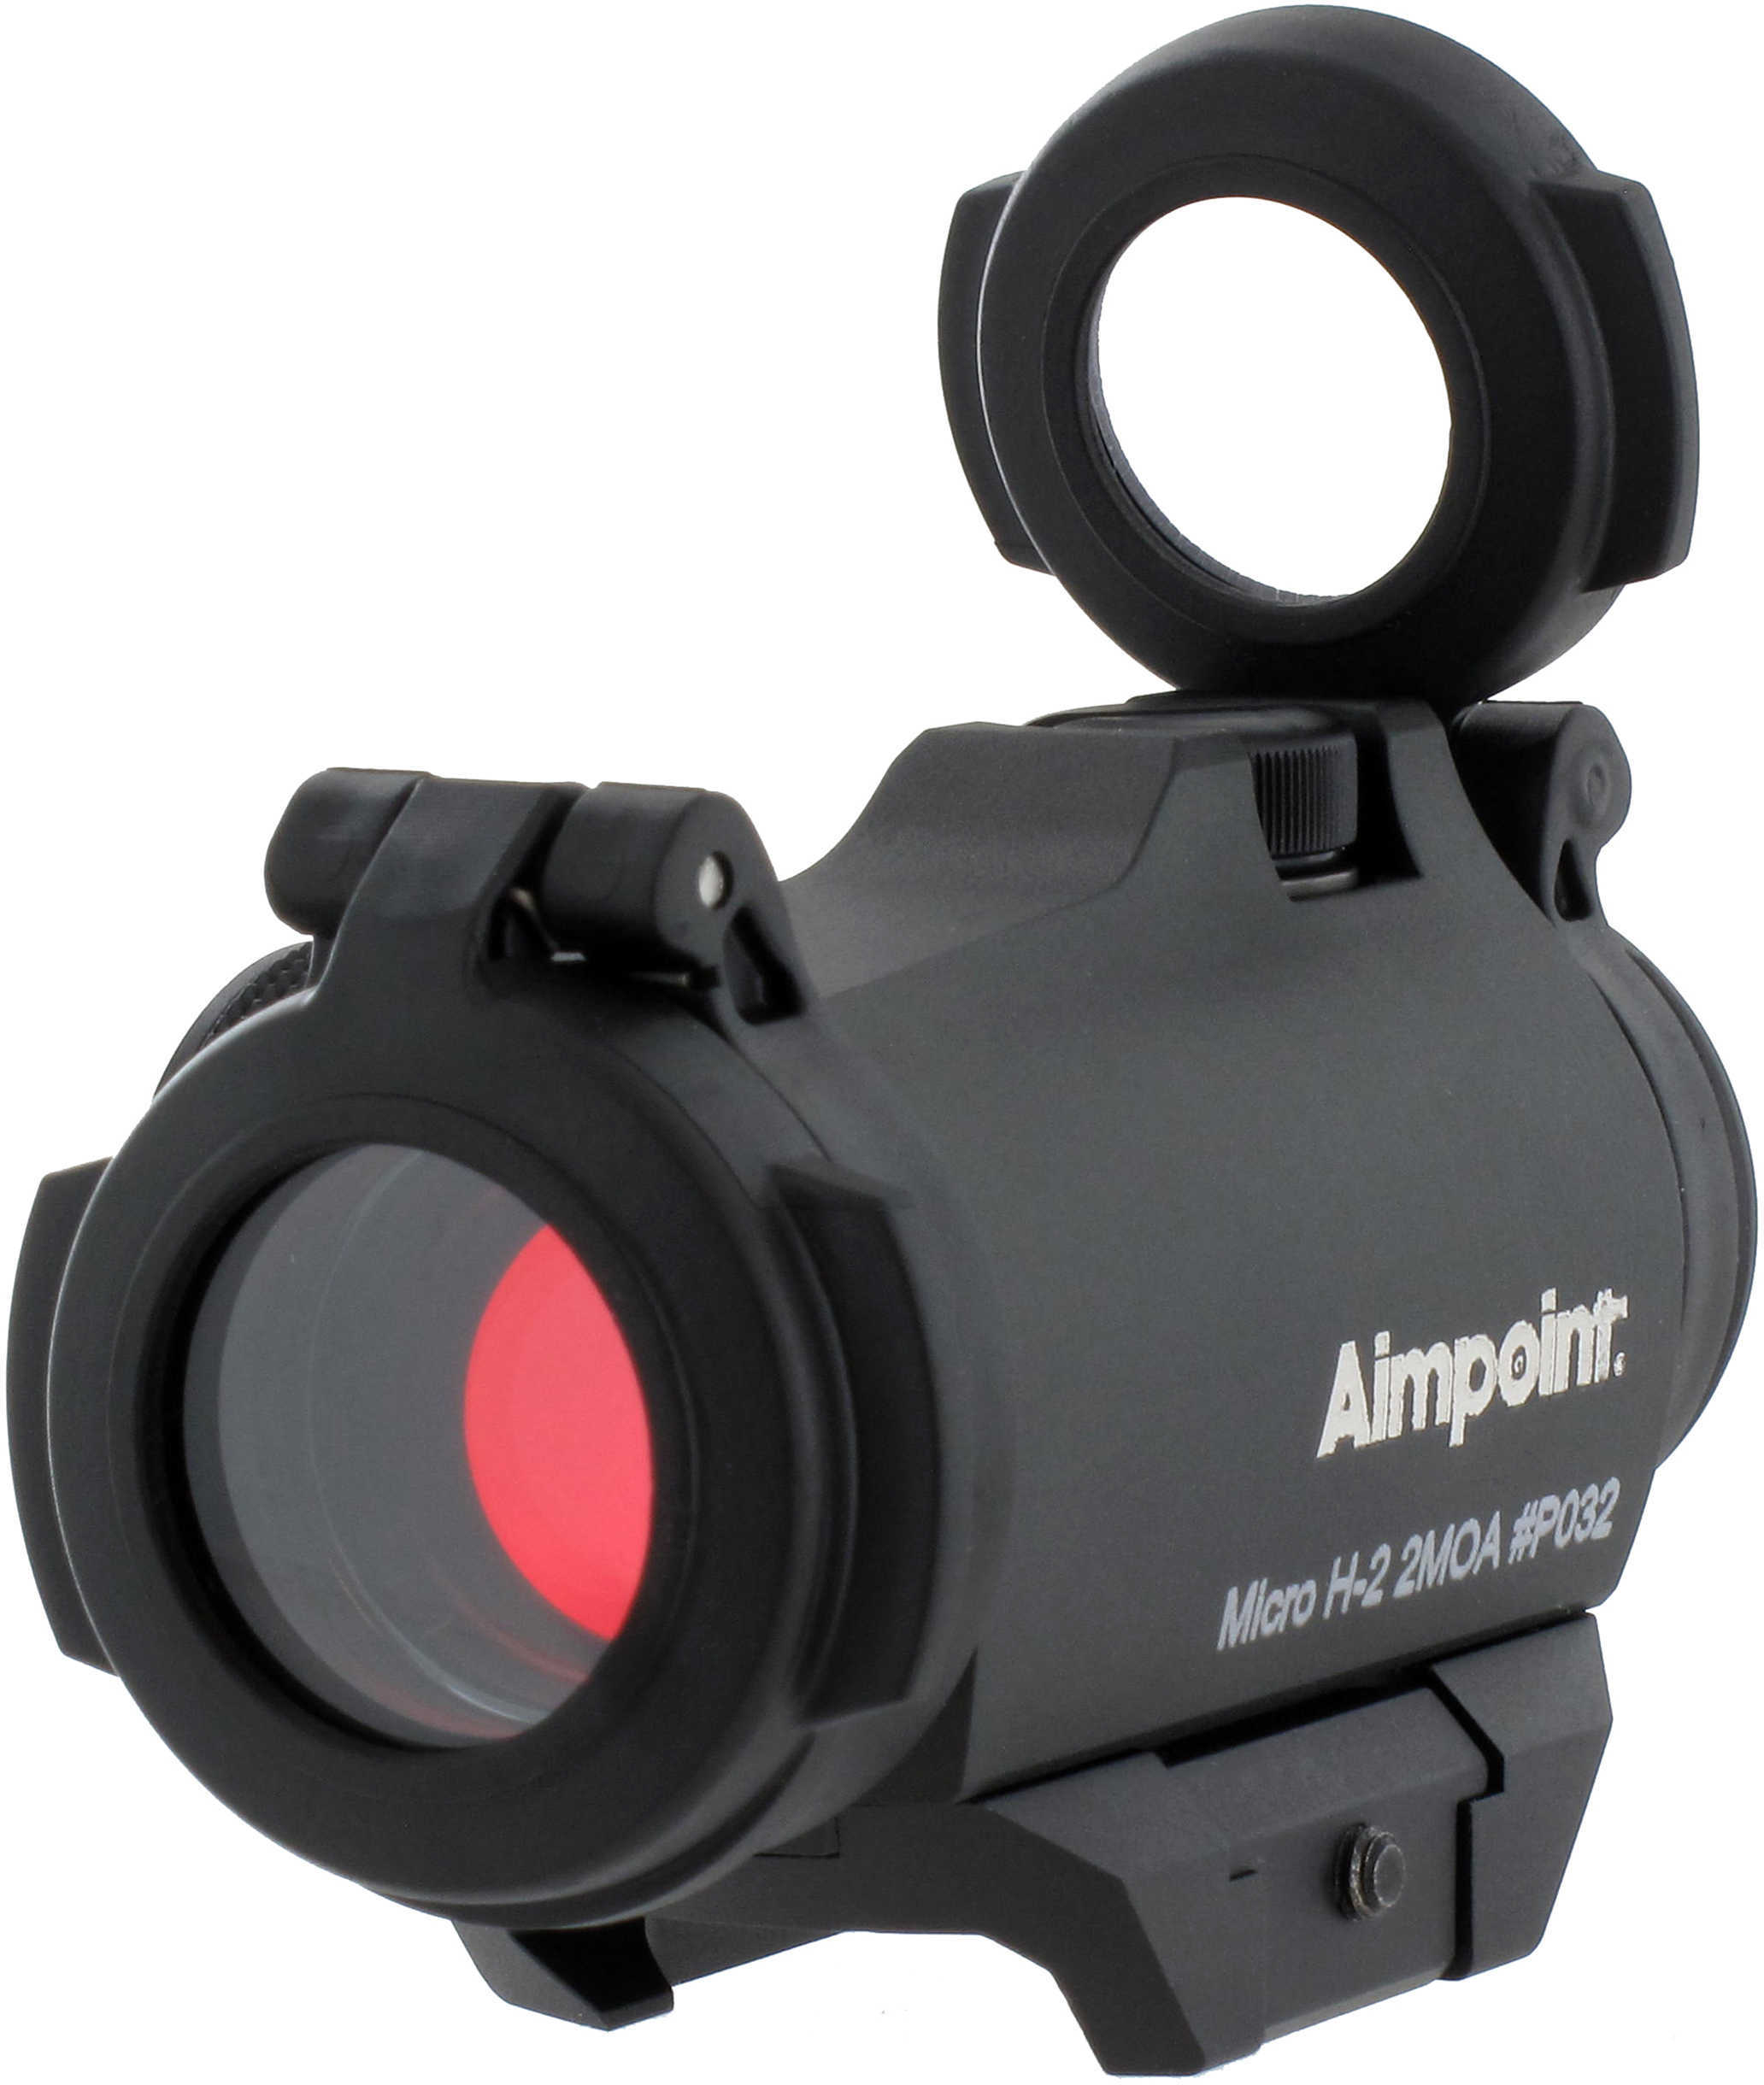 Aimpoint Standard Micro H-2 2 MOA, Complete Md: 200185